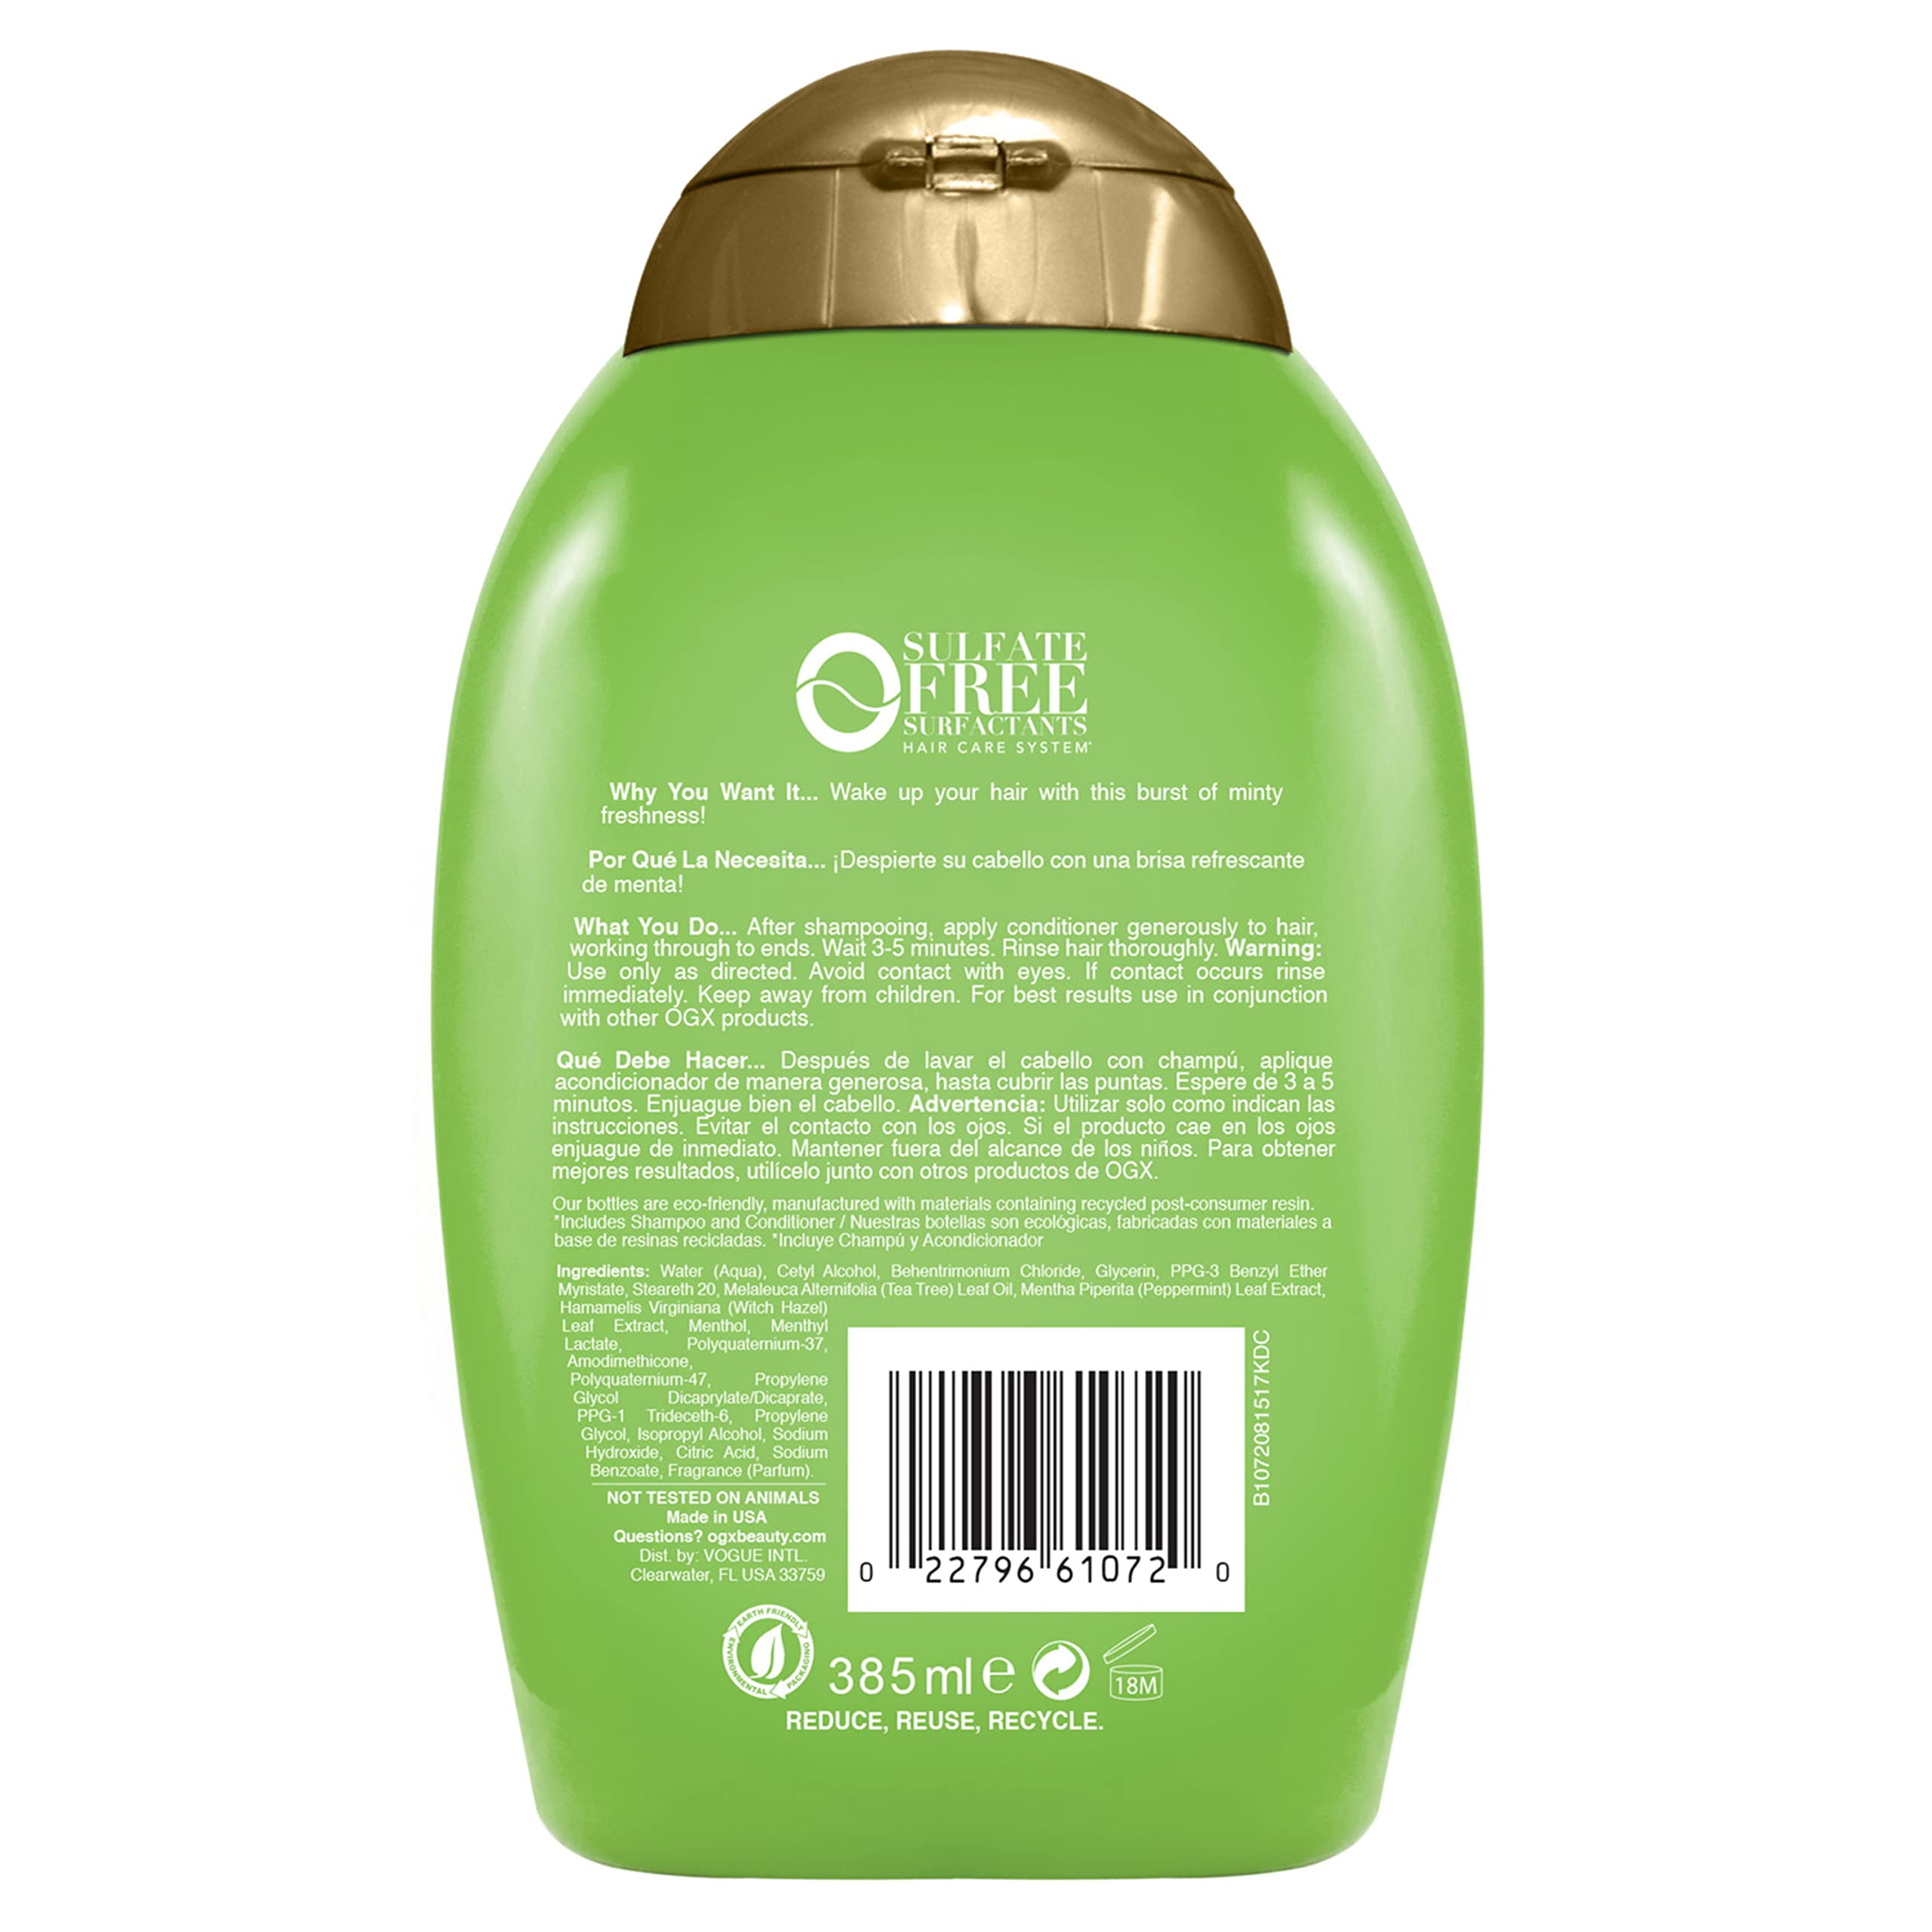 OGX Extra Strength Refreshing Scalp + Teatree Mint Conditioner, Invigorating Conditioner with Tea Tree & Peppermint Oil & Witch Hazel, Paraben-Free, Sulfate-Free Surfactants, 13 fl oz